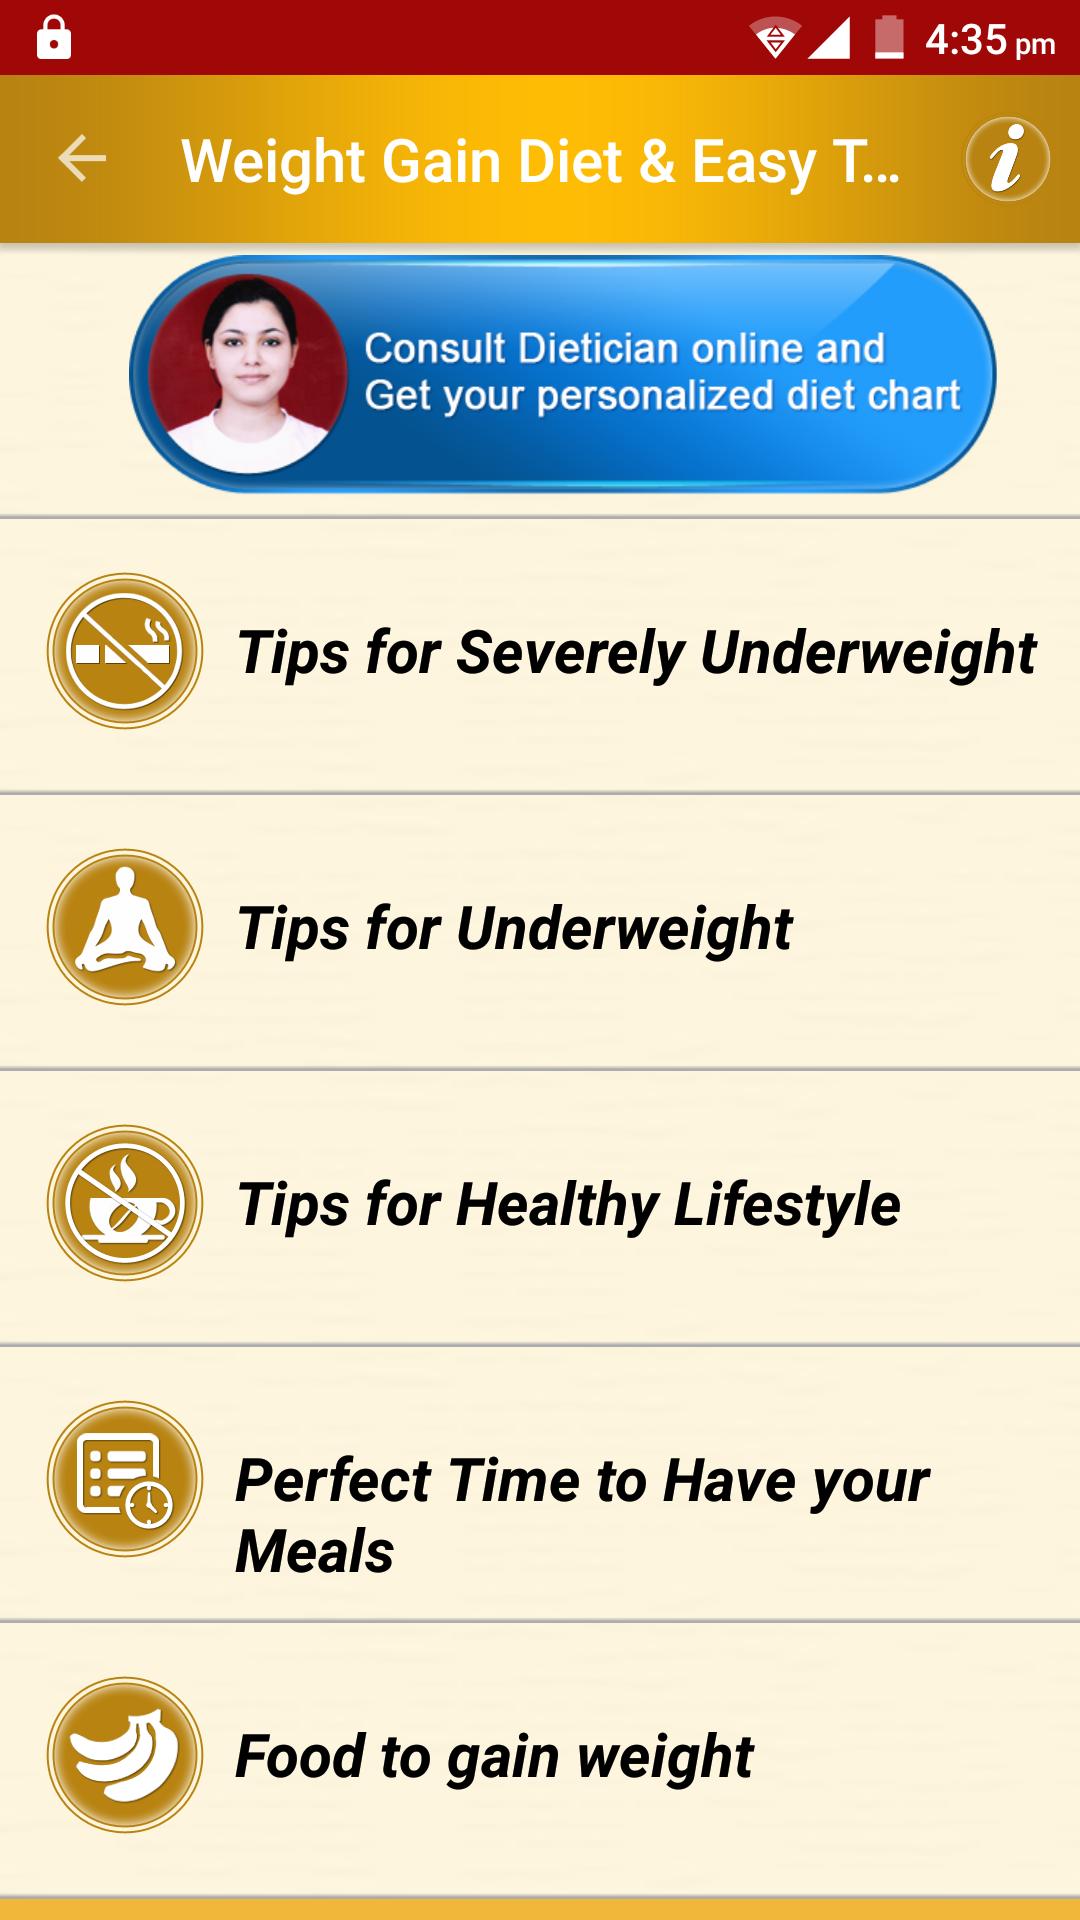 Weight Gain Diet Plan & Foods for Android - APK Download